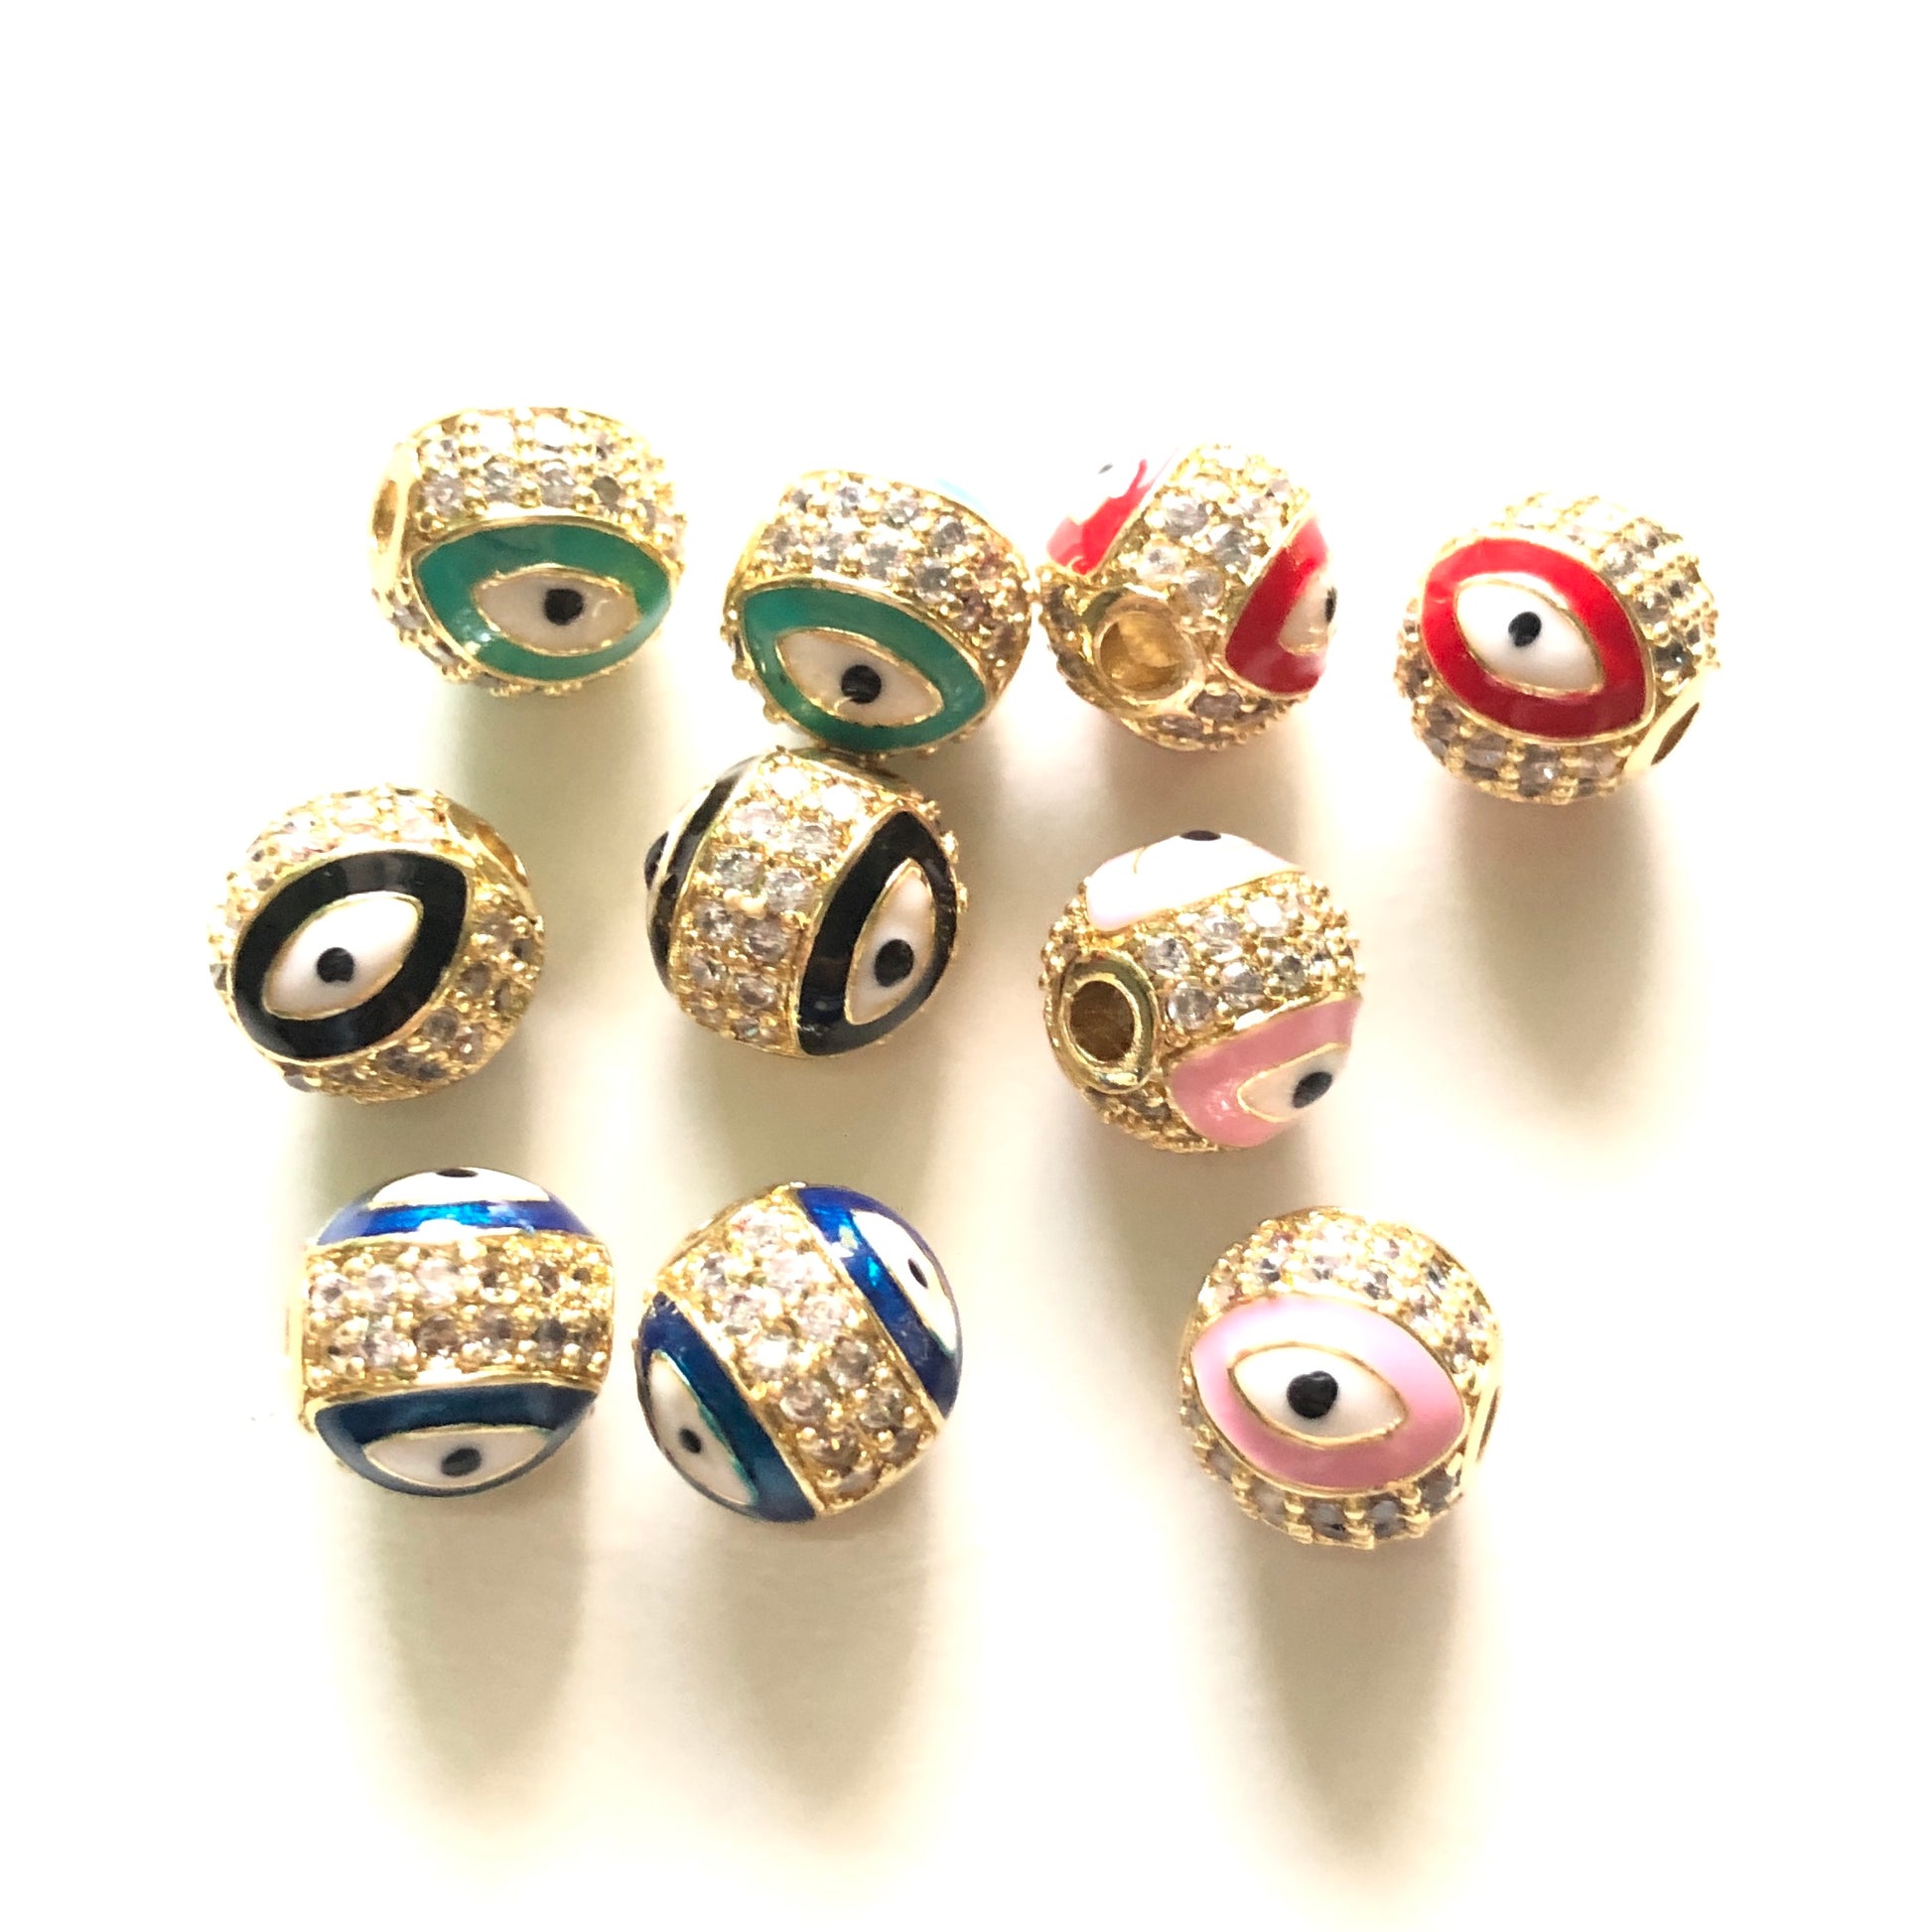 10pcs/lot 10mm CZ Paved Gold Evil Eye Ball Spacers Beads Mix Colors CZ Paved Spacers 10mm Beads Ball Beads New Spacers Arrivals Charms Beads Beyond